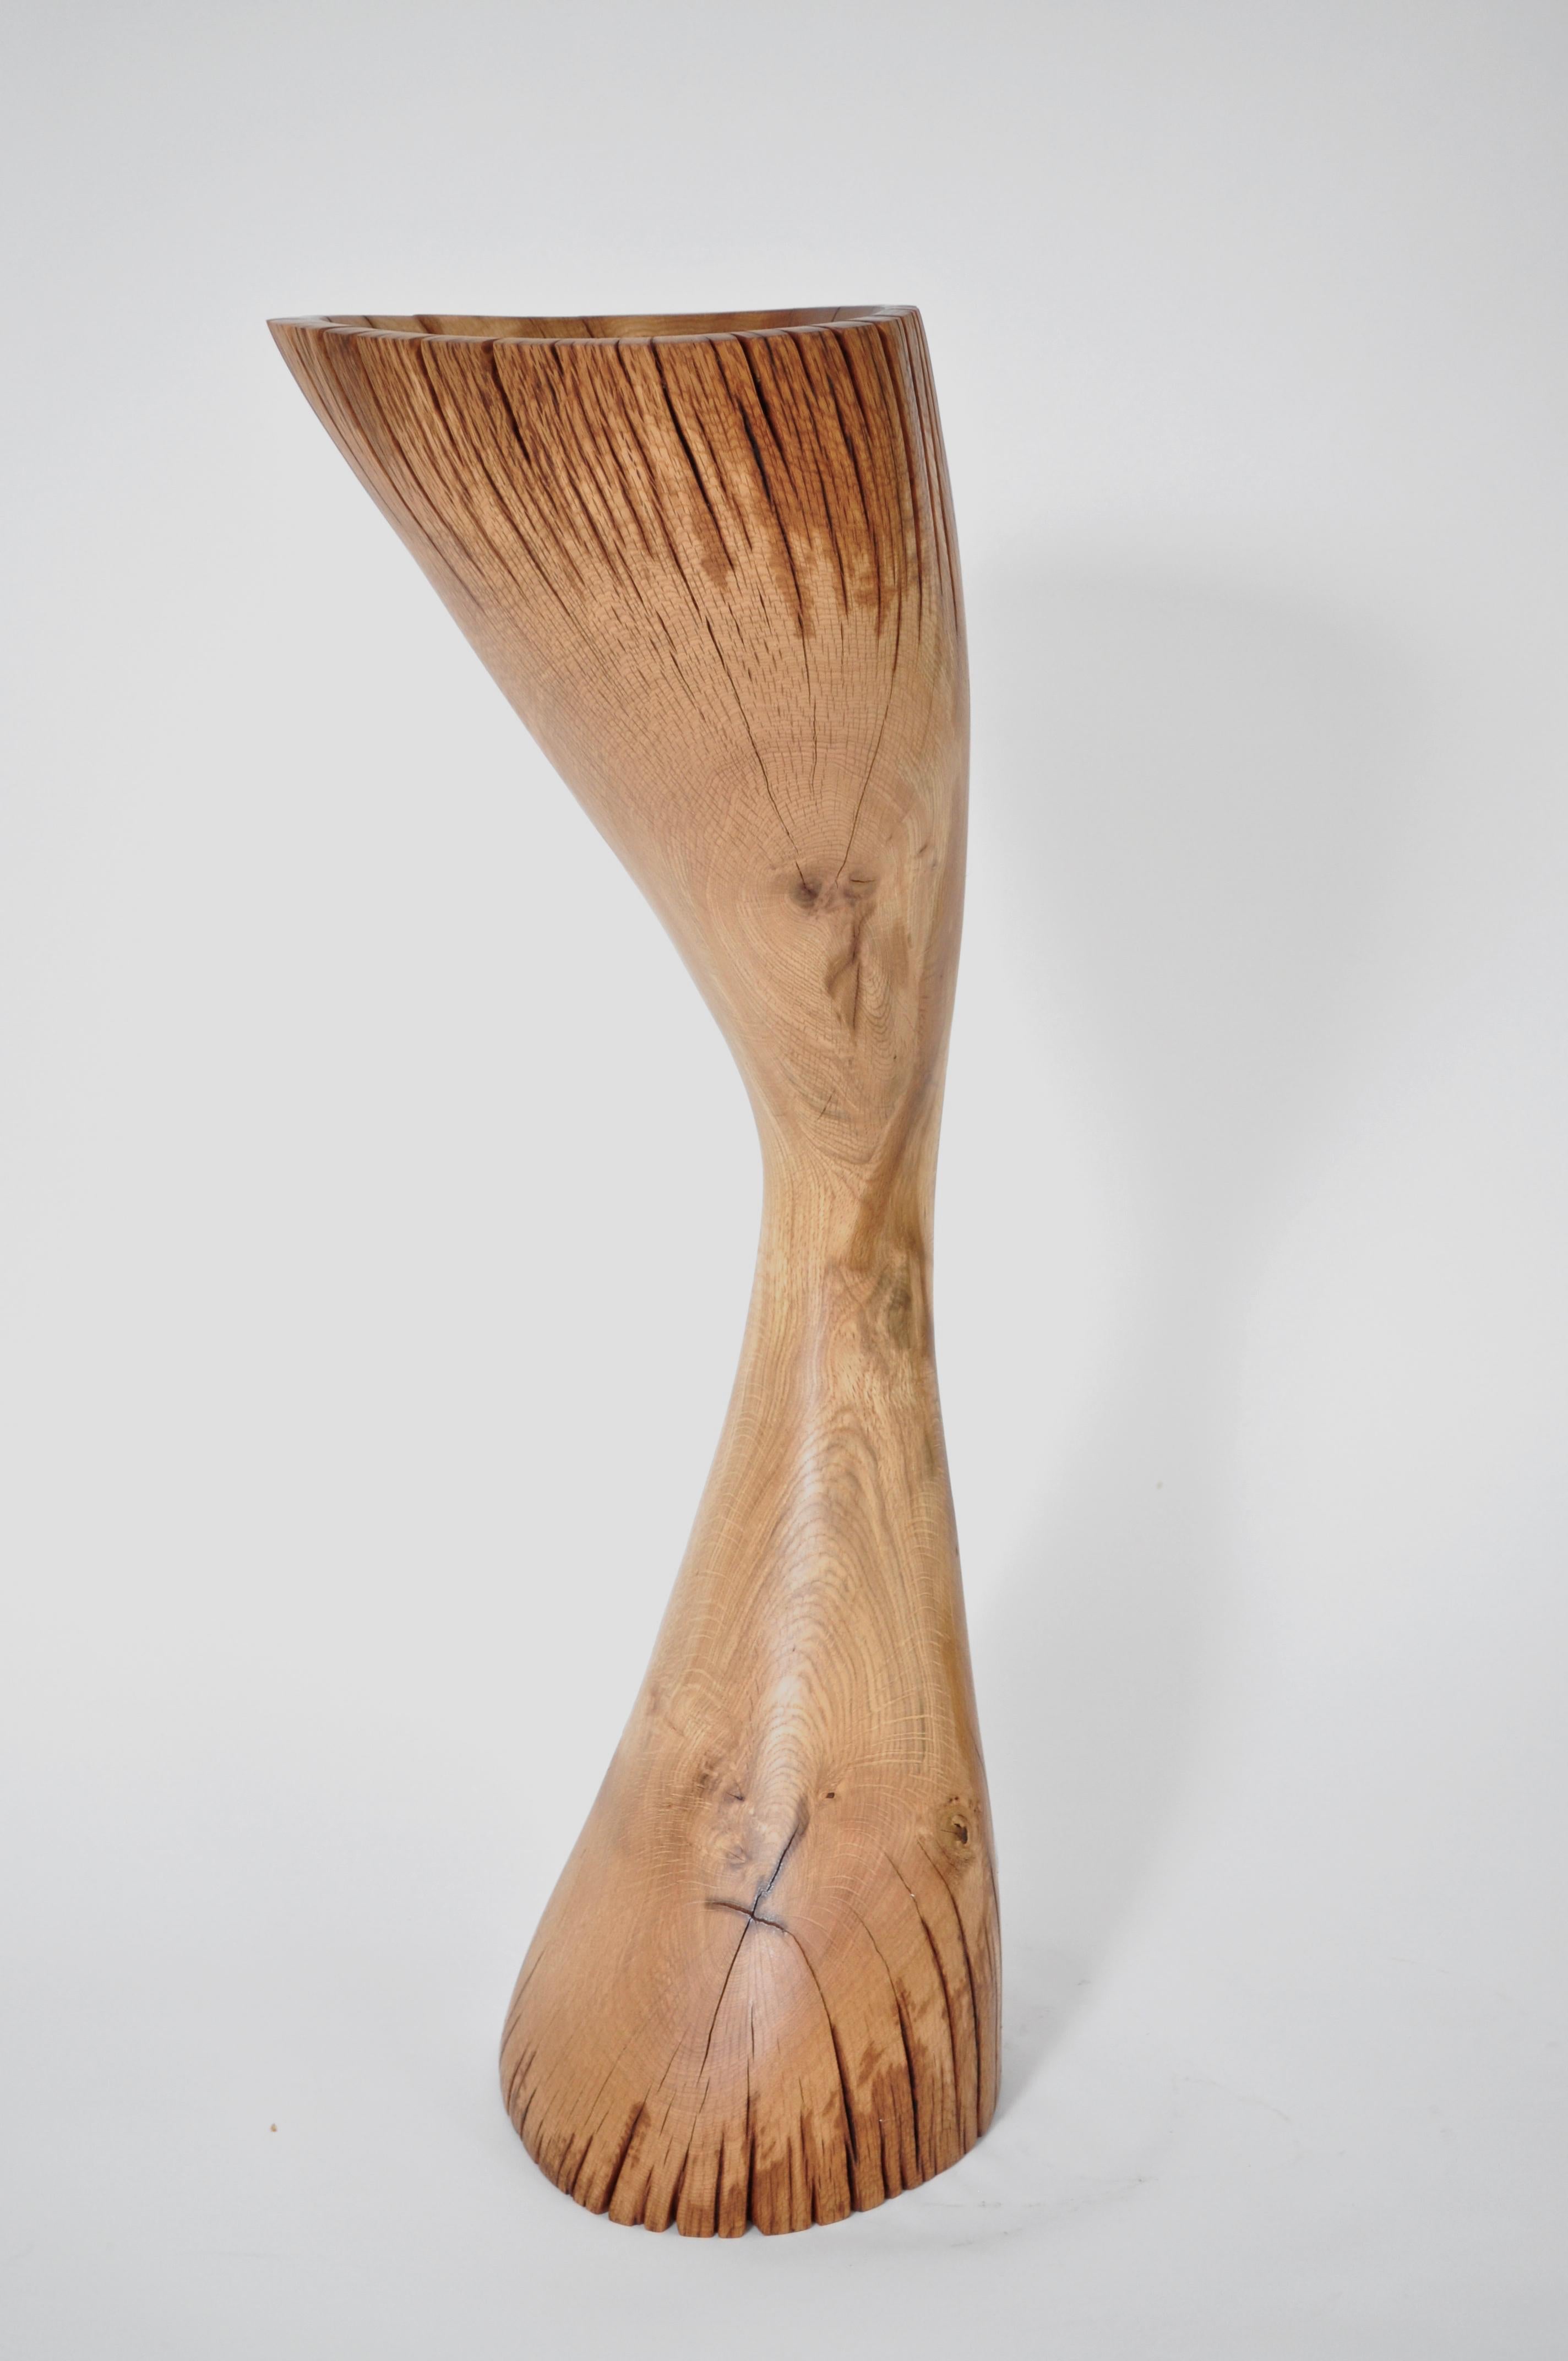 Vessel 1254 by Jörg Pietschmann
Dimensions: D 30 x W 34 x H 97 cm 
Materials: oak. 
Finish: polished oil finish.


Carved out of from a curved oak trunk.
In Pietschmann’s sculptures, trees that for centuries were part of a landscape and founded in